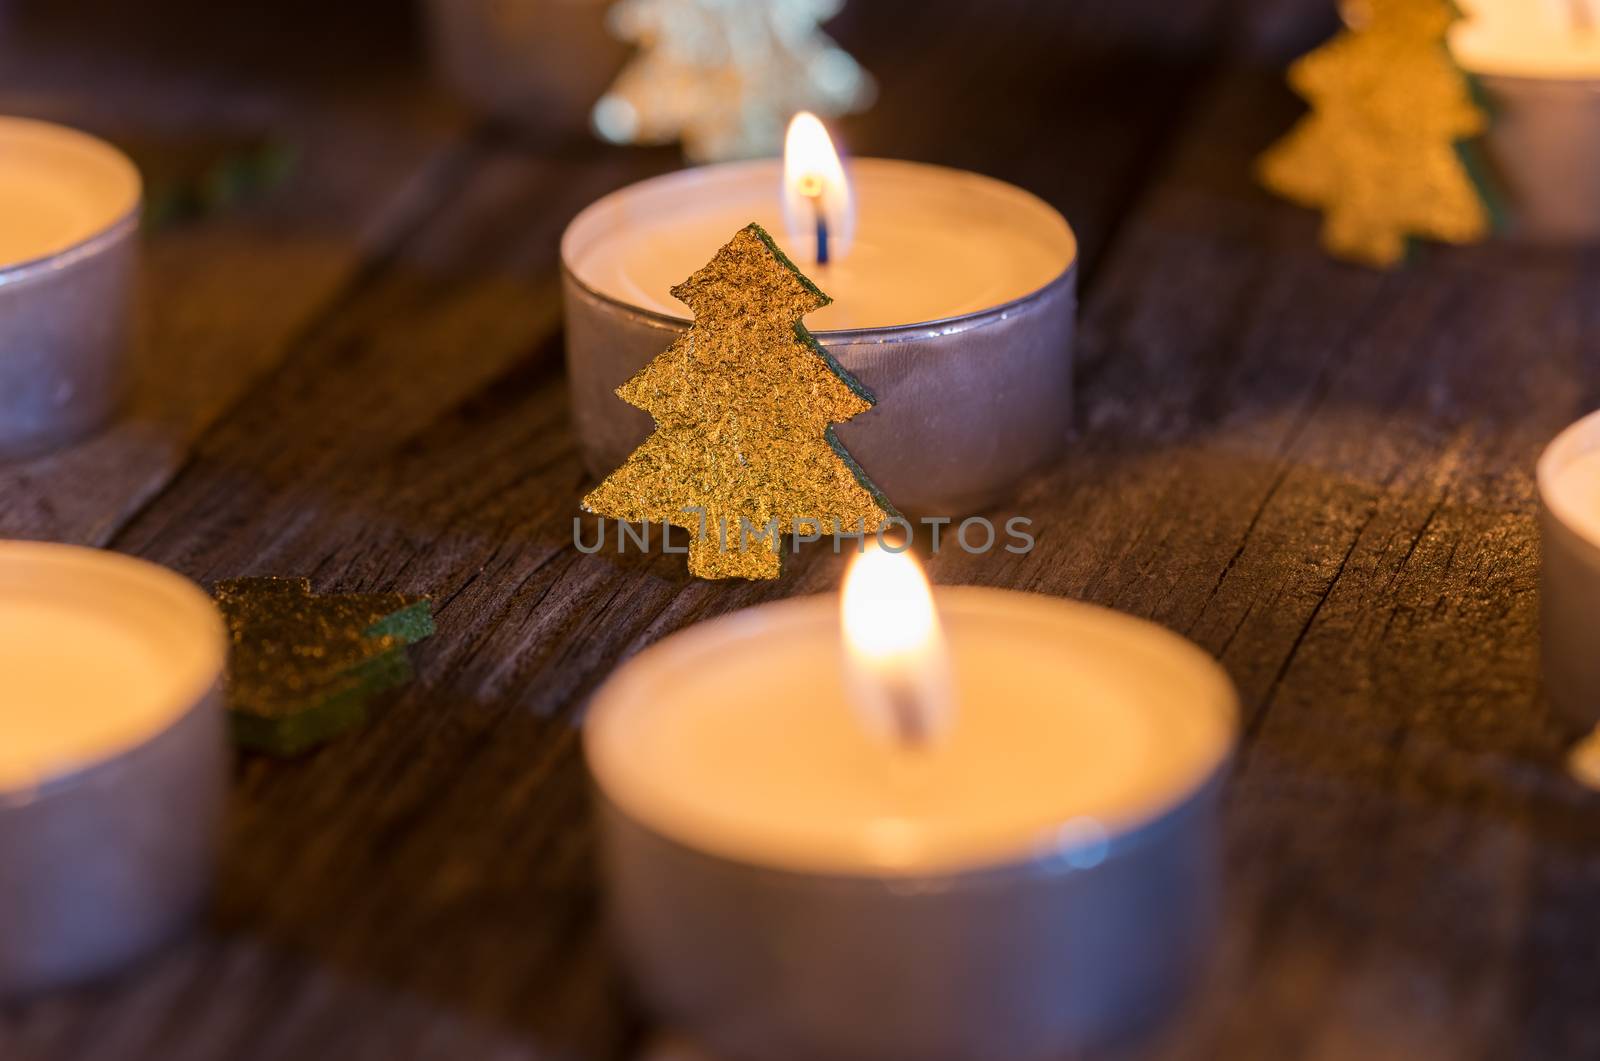 Advent or Christmas candlelight with ornaments on wood